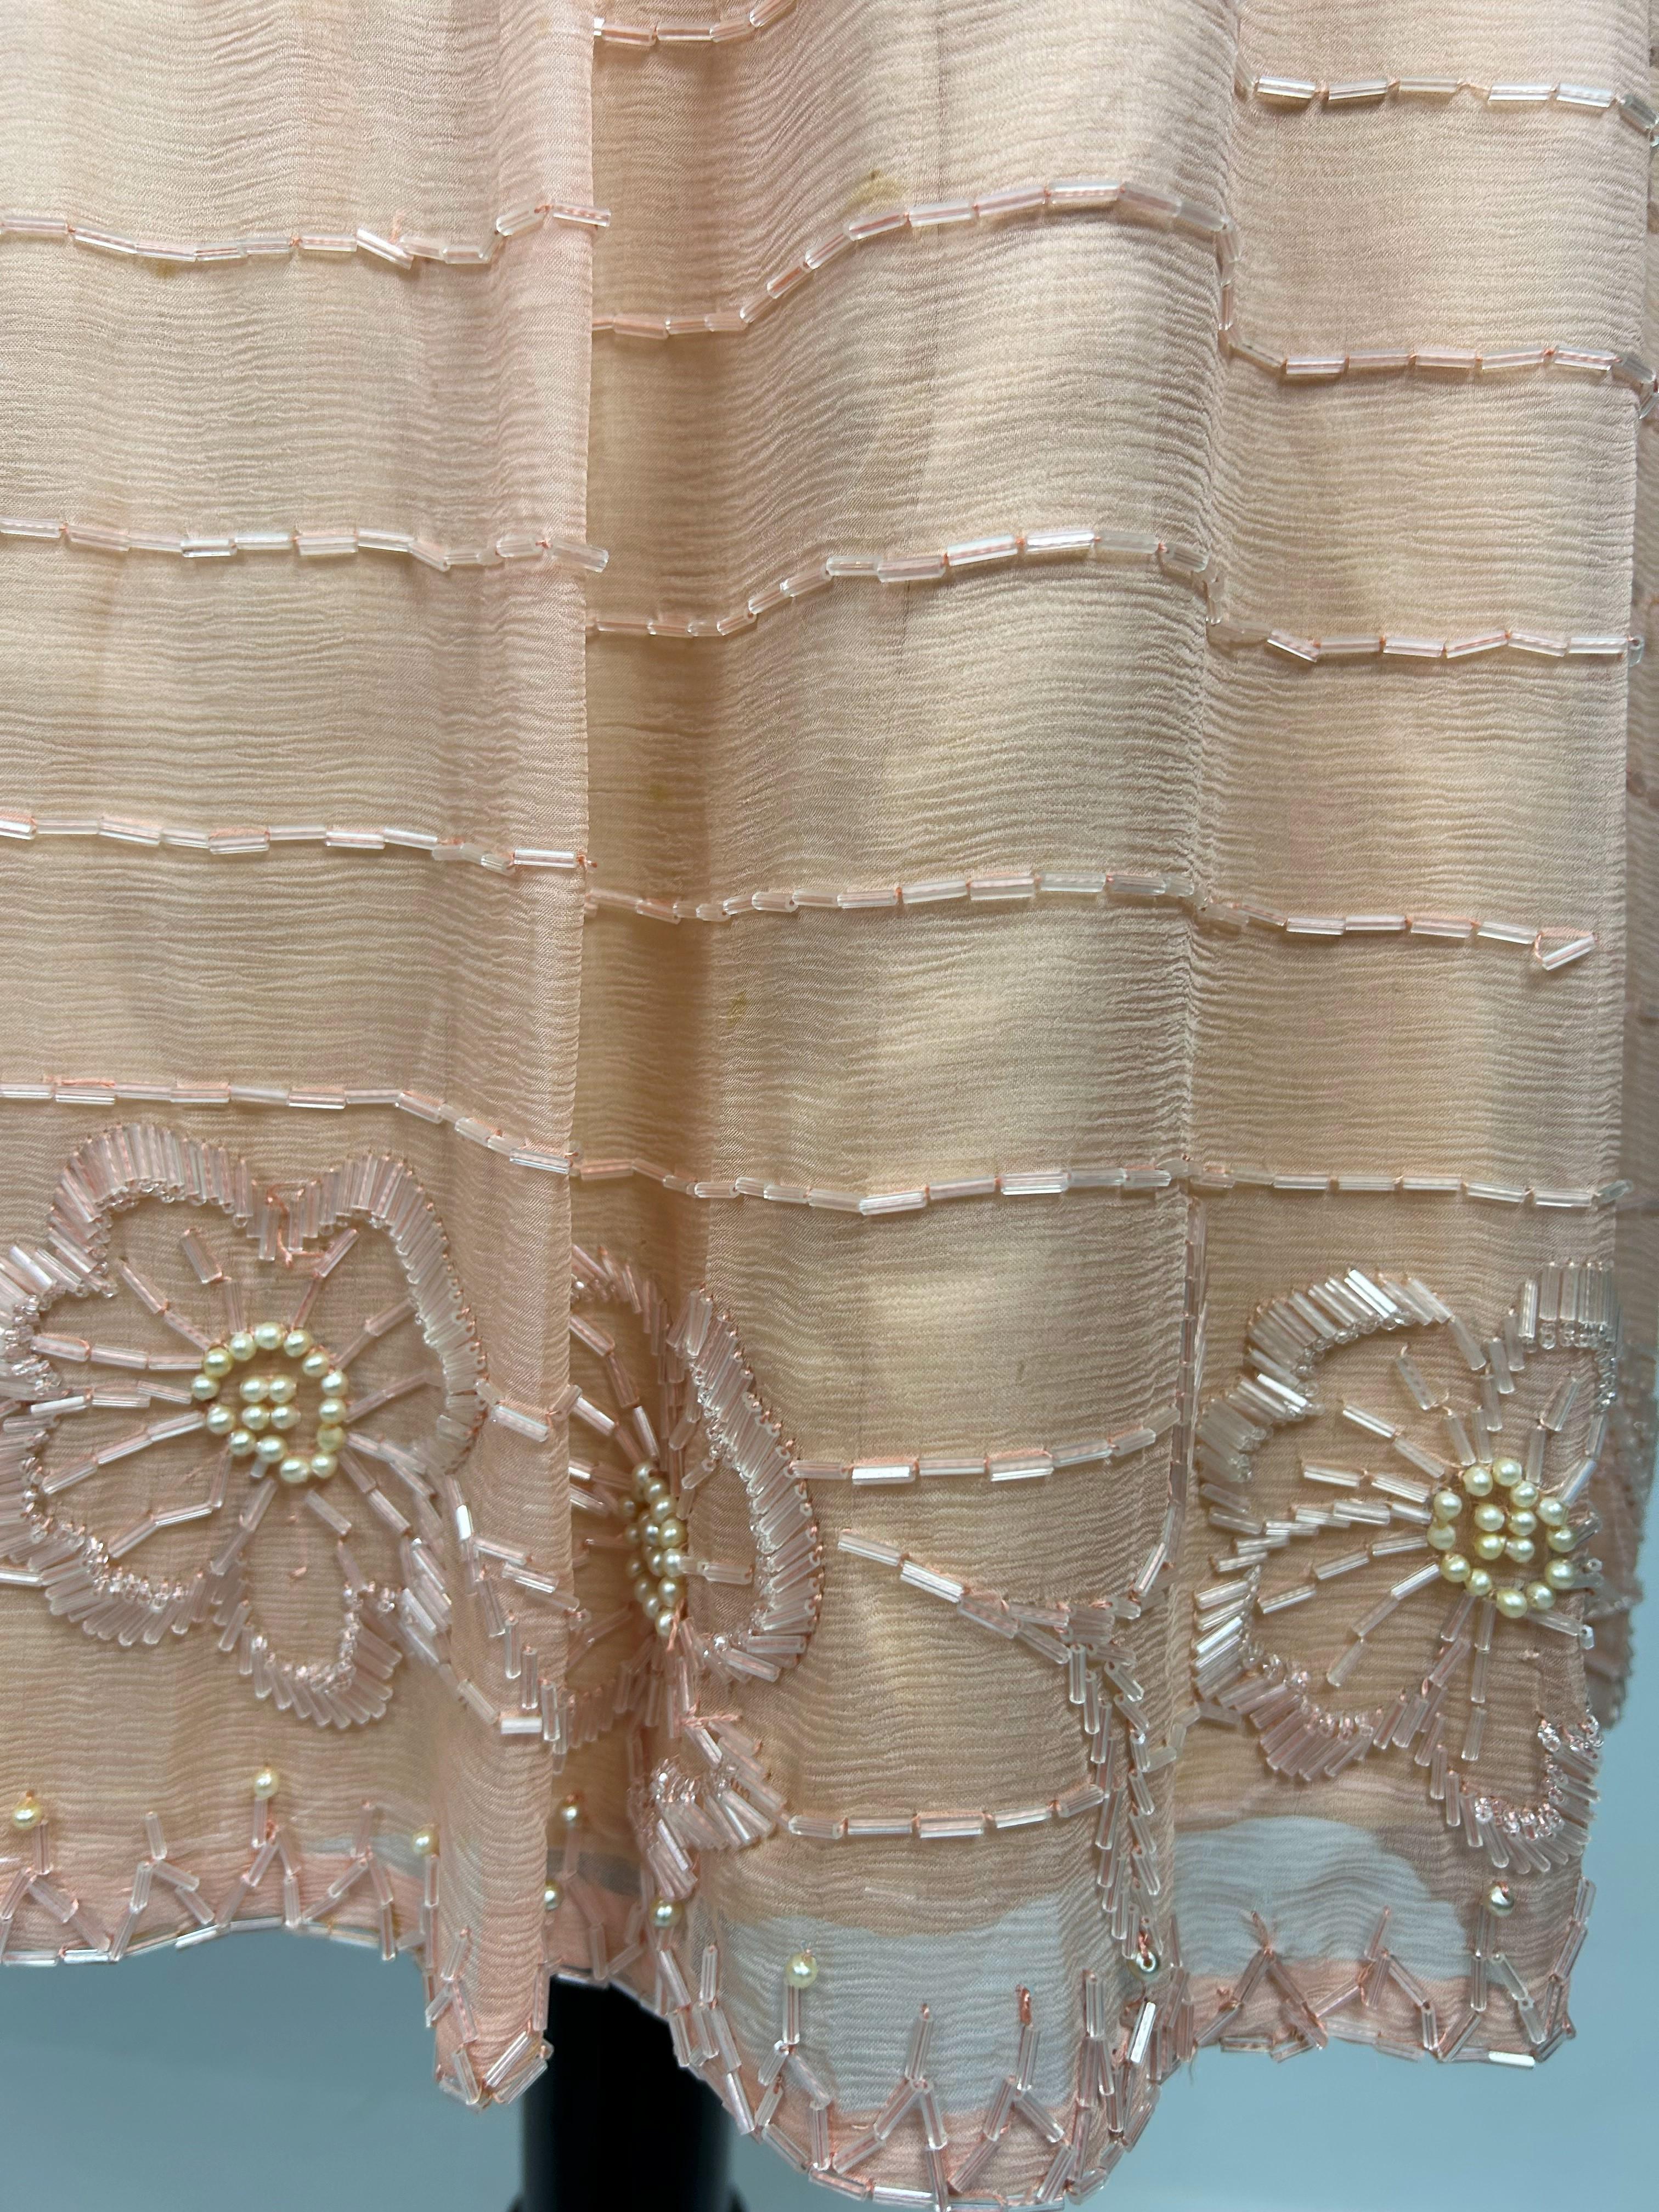 A Salmon embroidered Chiffon Flapper Dress - France Circa 1925 For Sale 11